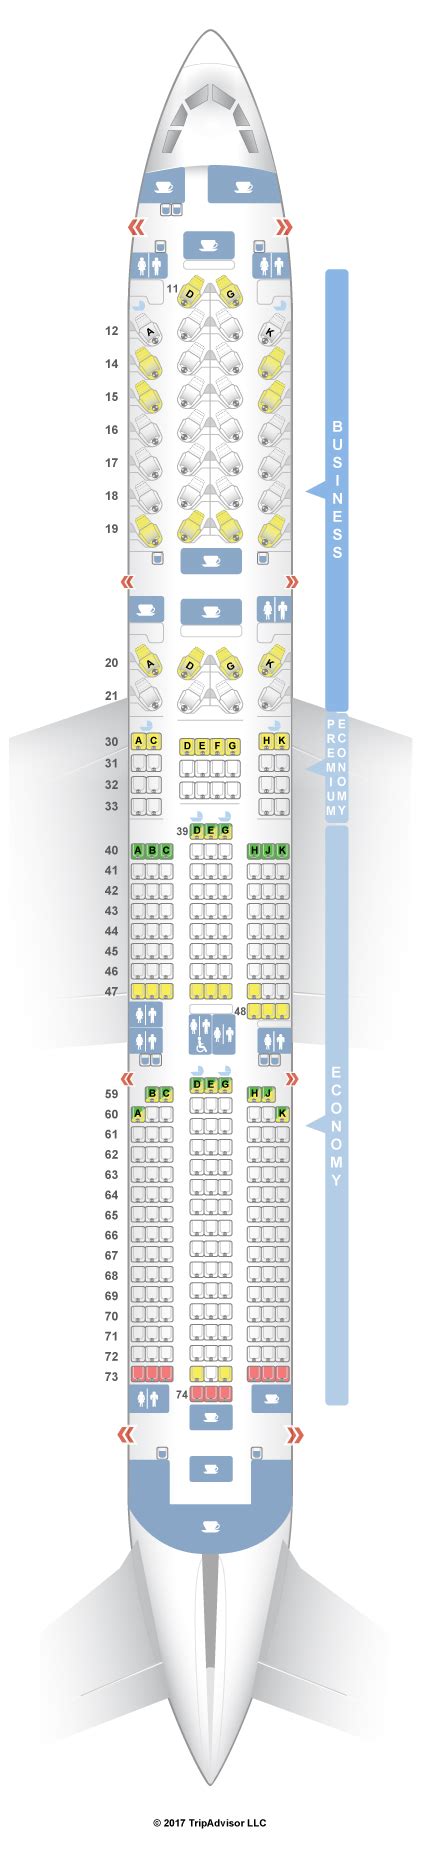 Cathay Pacific A359 Seating Chart Elcho Table